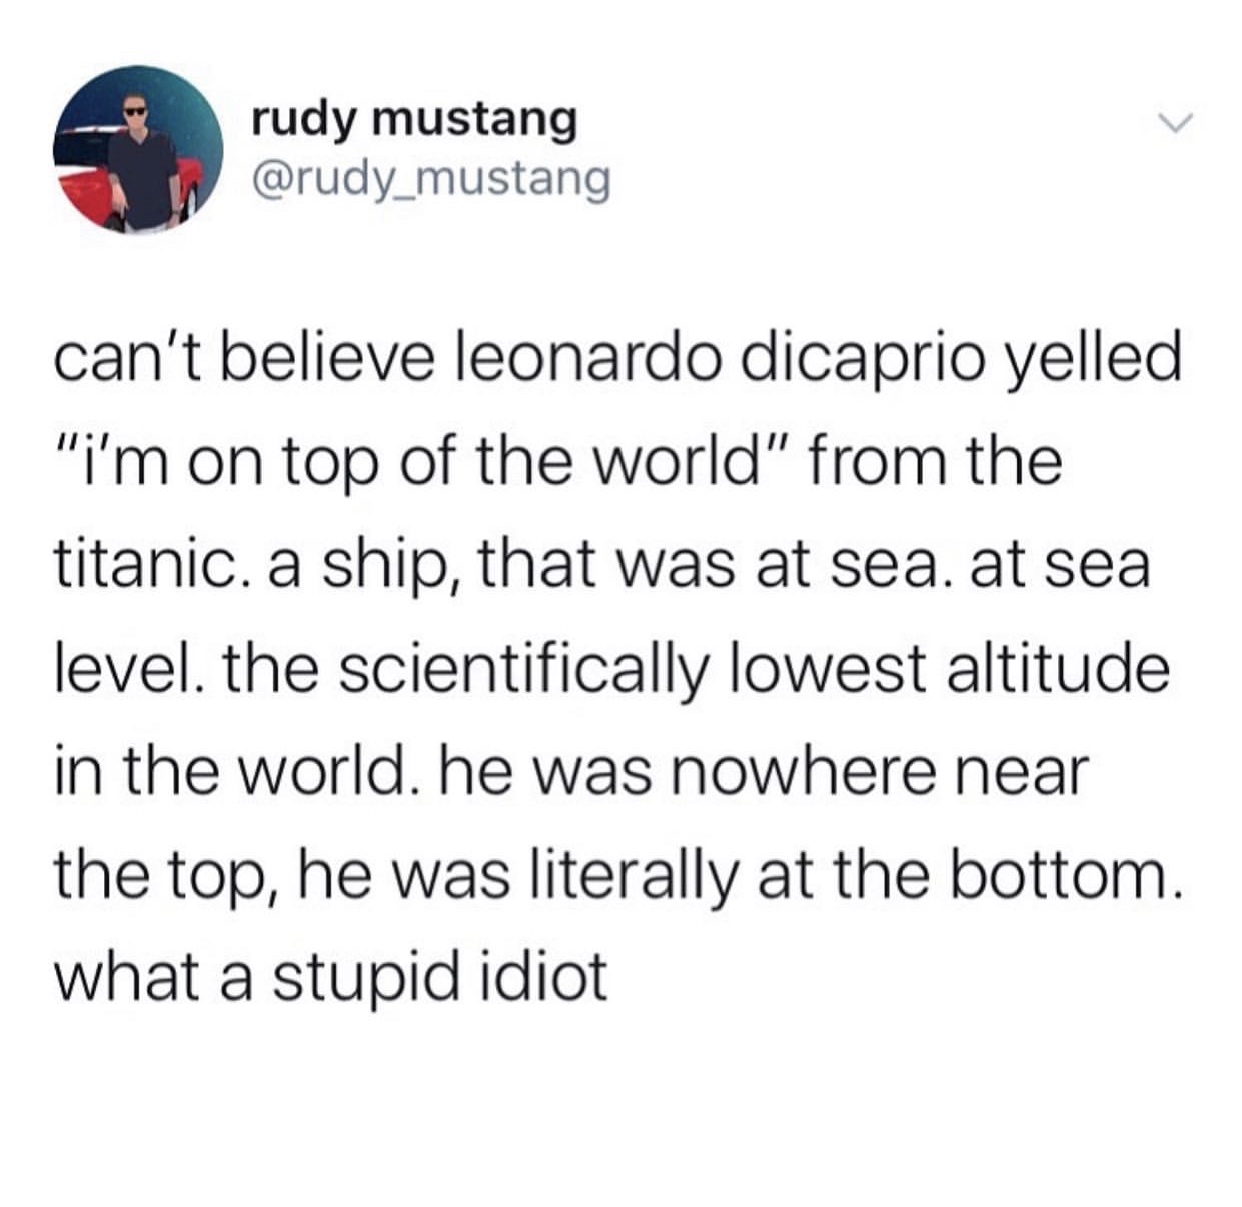 dril twitter - rudy mustang can't believe leonardo dicaprio yelled "i'm on top of the world" from the titanic. a ship, that was at sea. at sea level. the scientifically lowest altitude in the world, he was nowhere near the top, he was literally at the bot